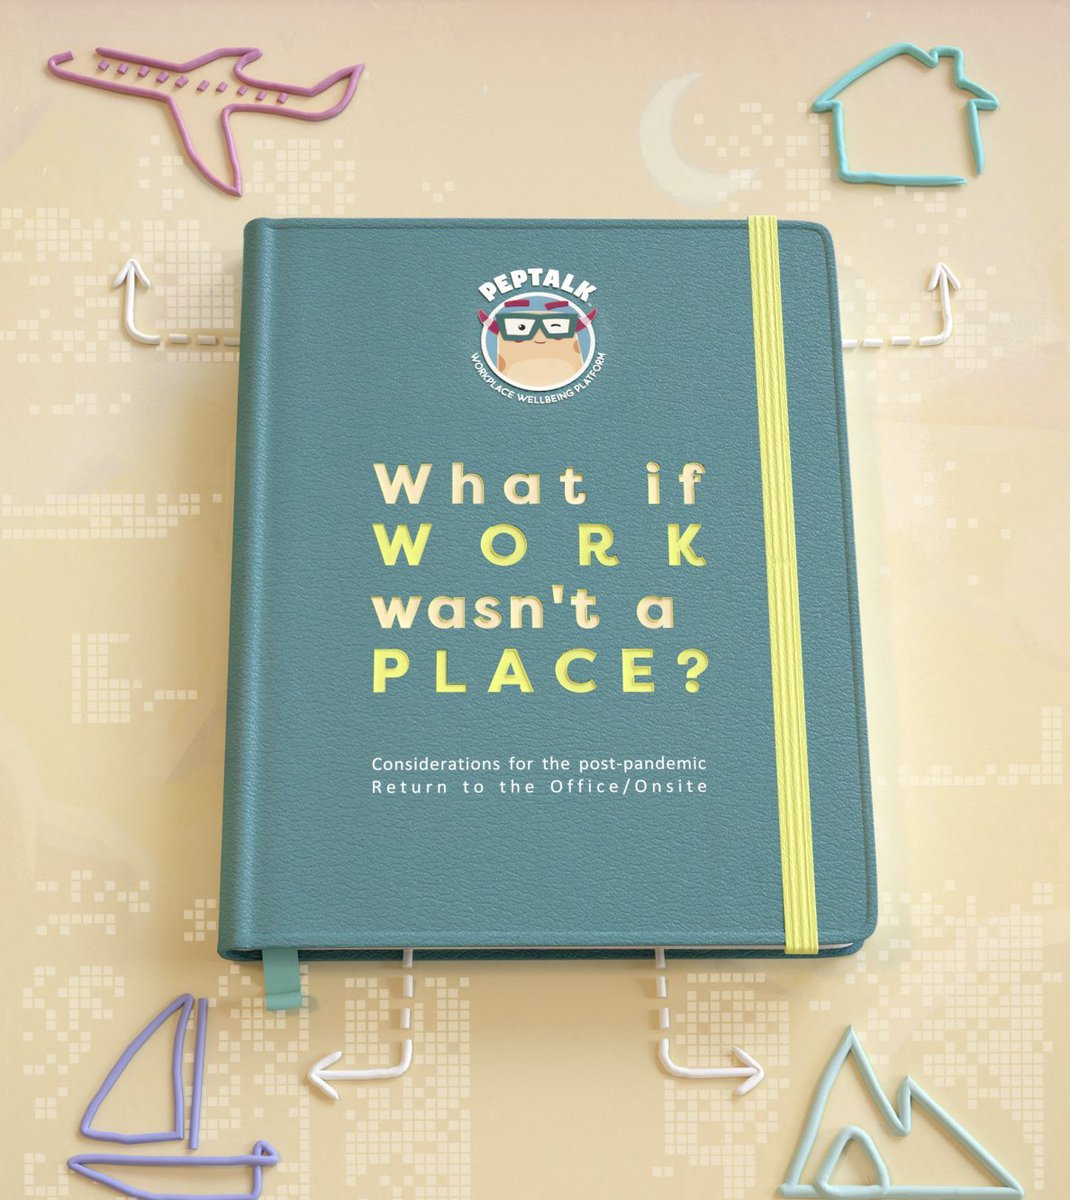 For all those who reached out to me looking for a copy of our 'What if Work Wasn't a Place' @PeptalkHQ guide , link below now for you to grab a copy 😁🔥🔥 peptalkhq.com/return-to-offi…